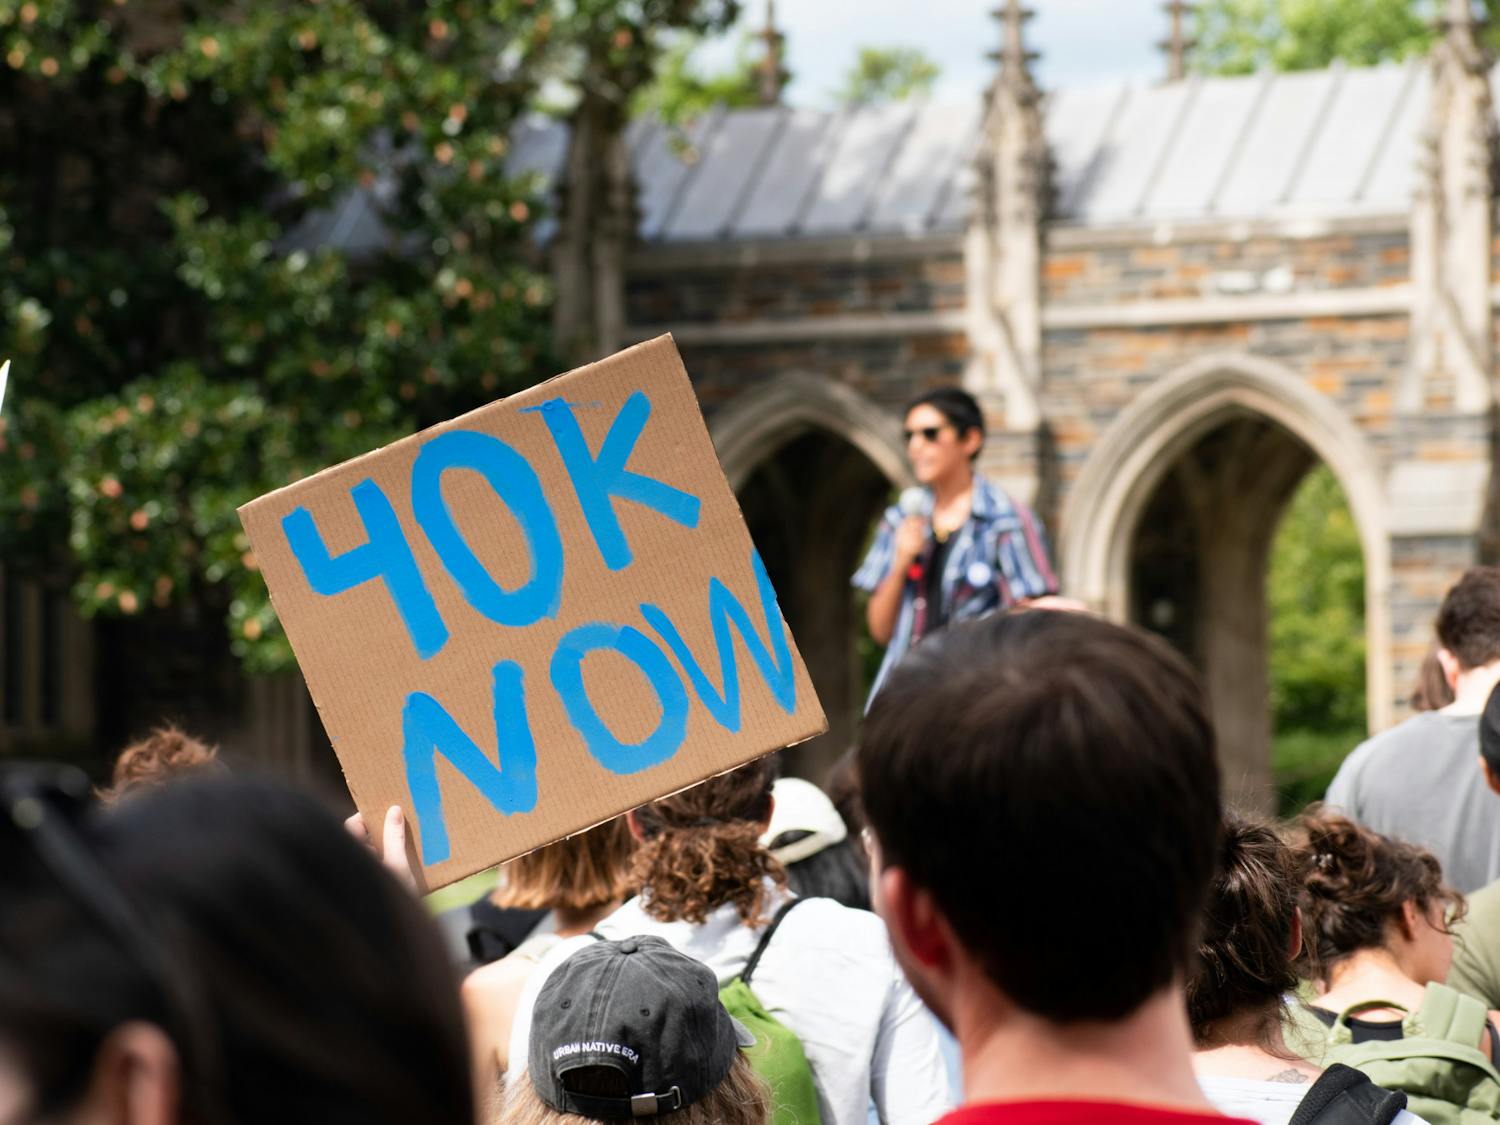 One supporter raises a "40K Now" sign at the Duke Graduate Student Union's rally on Monday, Sept. 5, 2022. The sign refers to DGSU's calls for a $40,000 stipend pay floor.